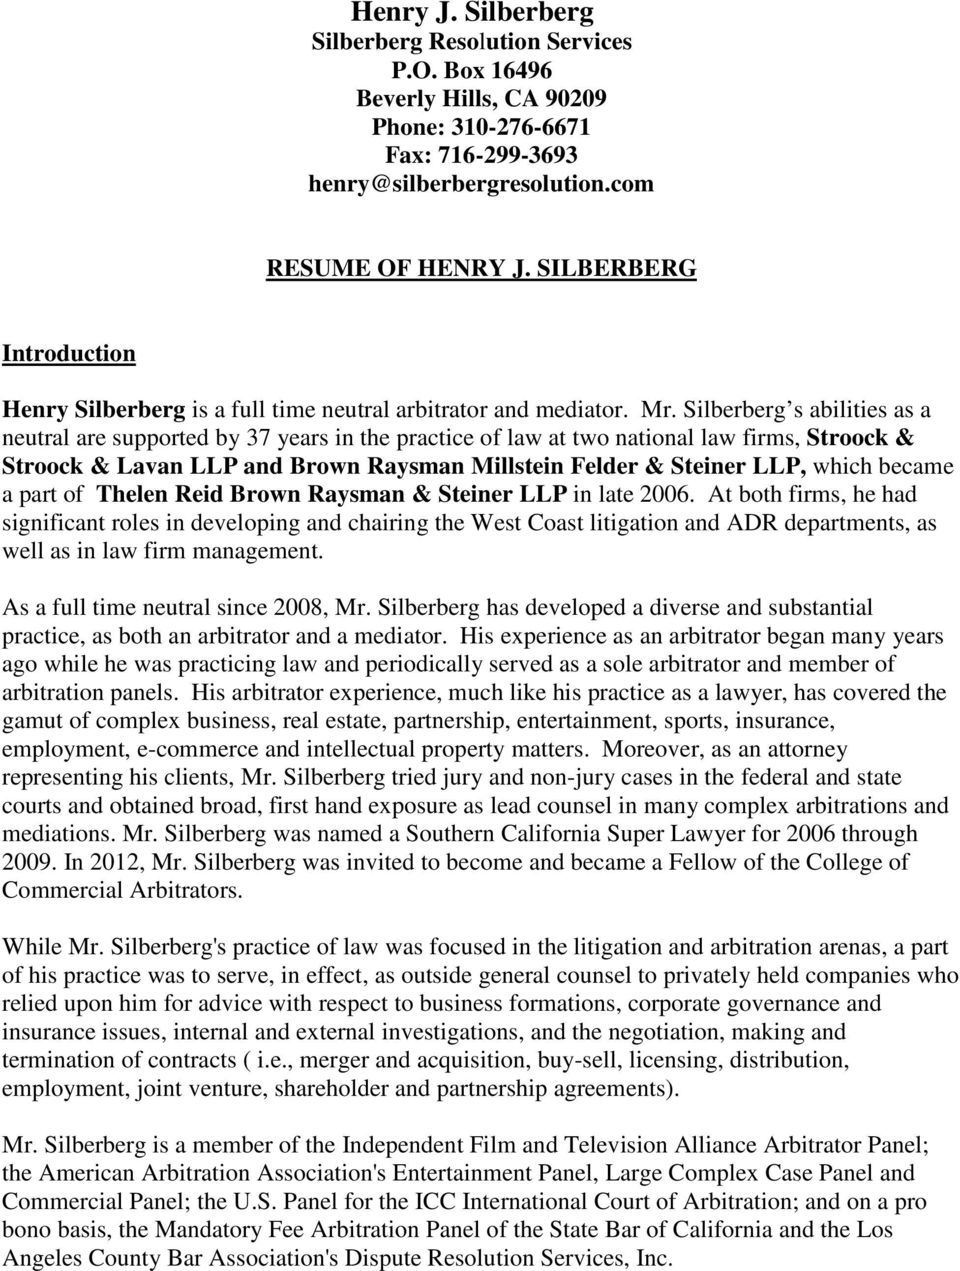 Silberberg s abilities as a neutral are supported by 37 years in the practice of law at two national law firms, Stroock & Stroock & Lavan LLP and Brown Raysman Millstein Felder & Steiner LLP, which